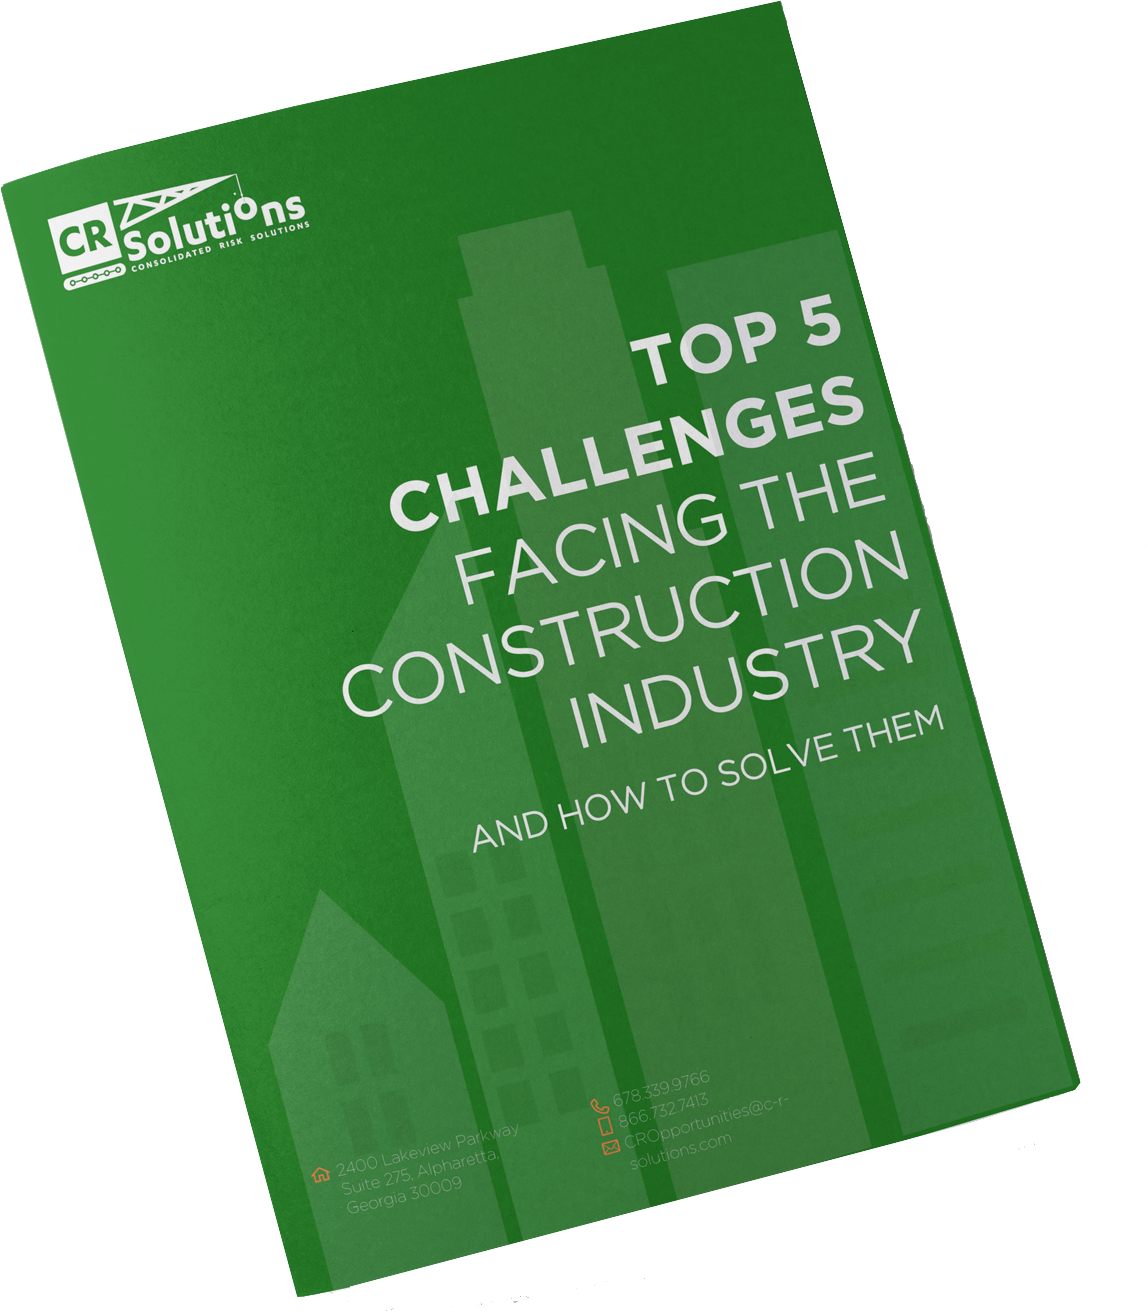 Top 5 Challenges Facing the Construction Industry and How to Solve Them Guide-1.png